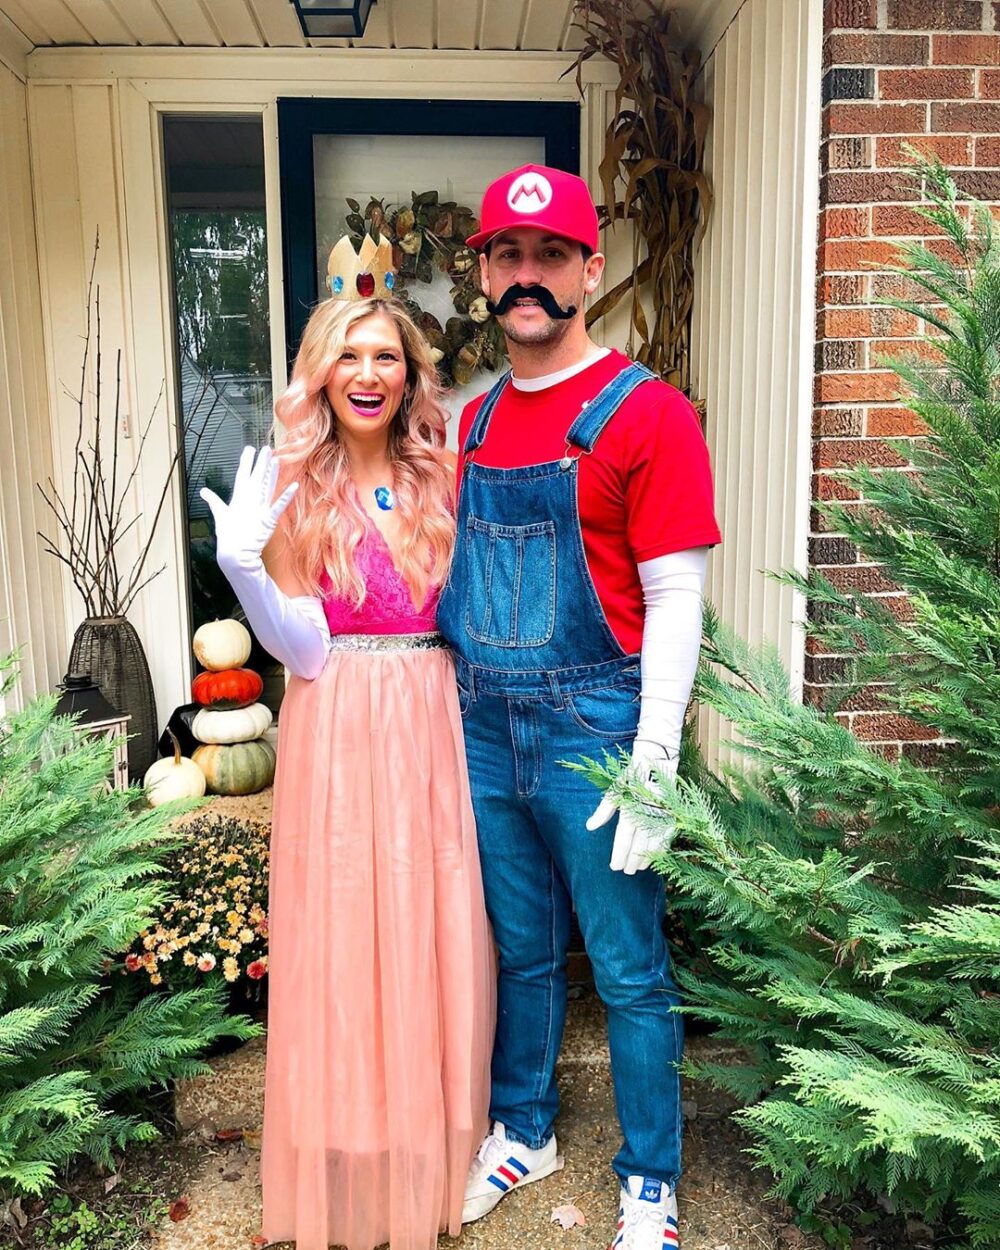 The 20 Best Couples Halloween Costume Ideas for 2020 - Wonder Forest